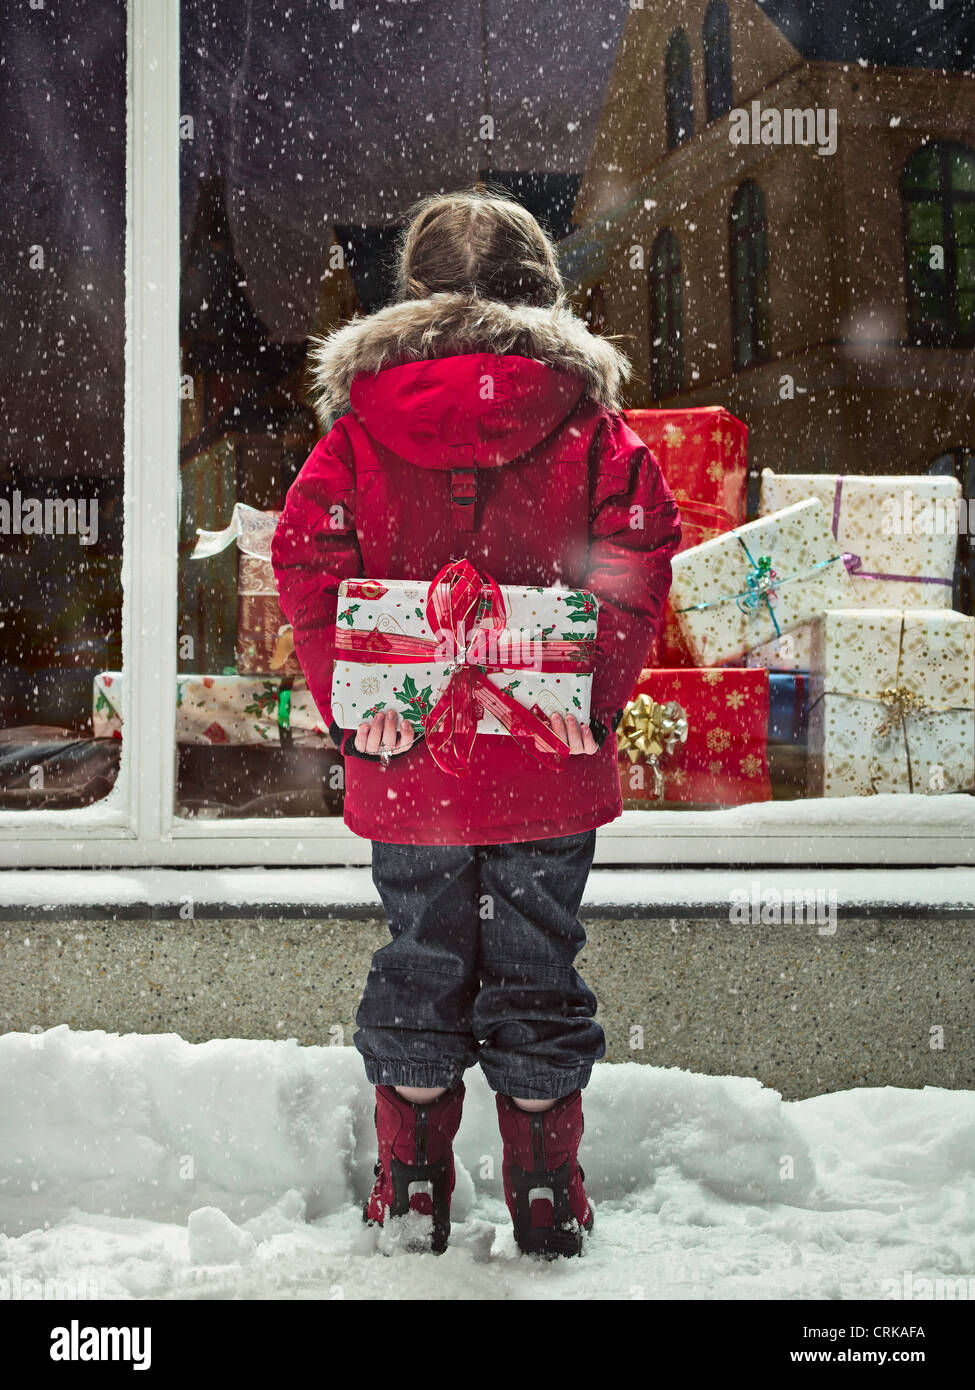 Girl holding Christmas present in snow Banque D'Images